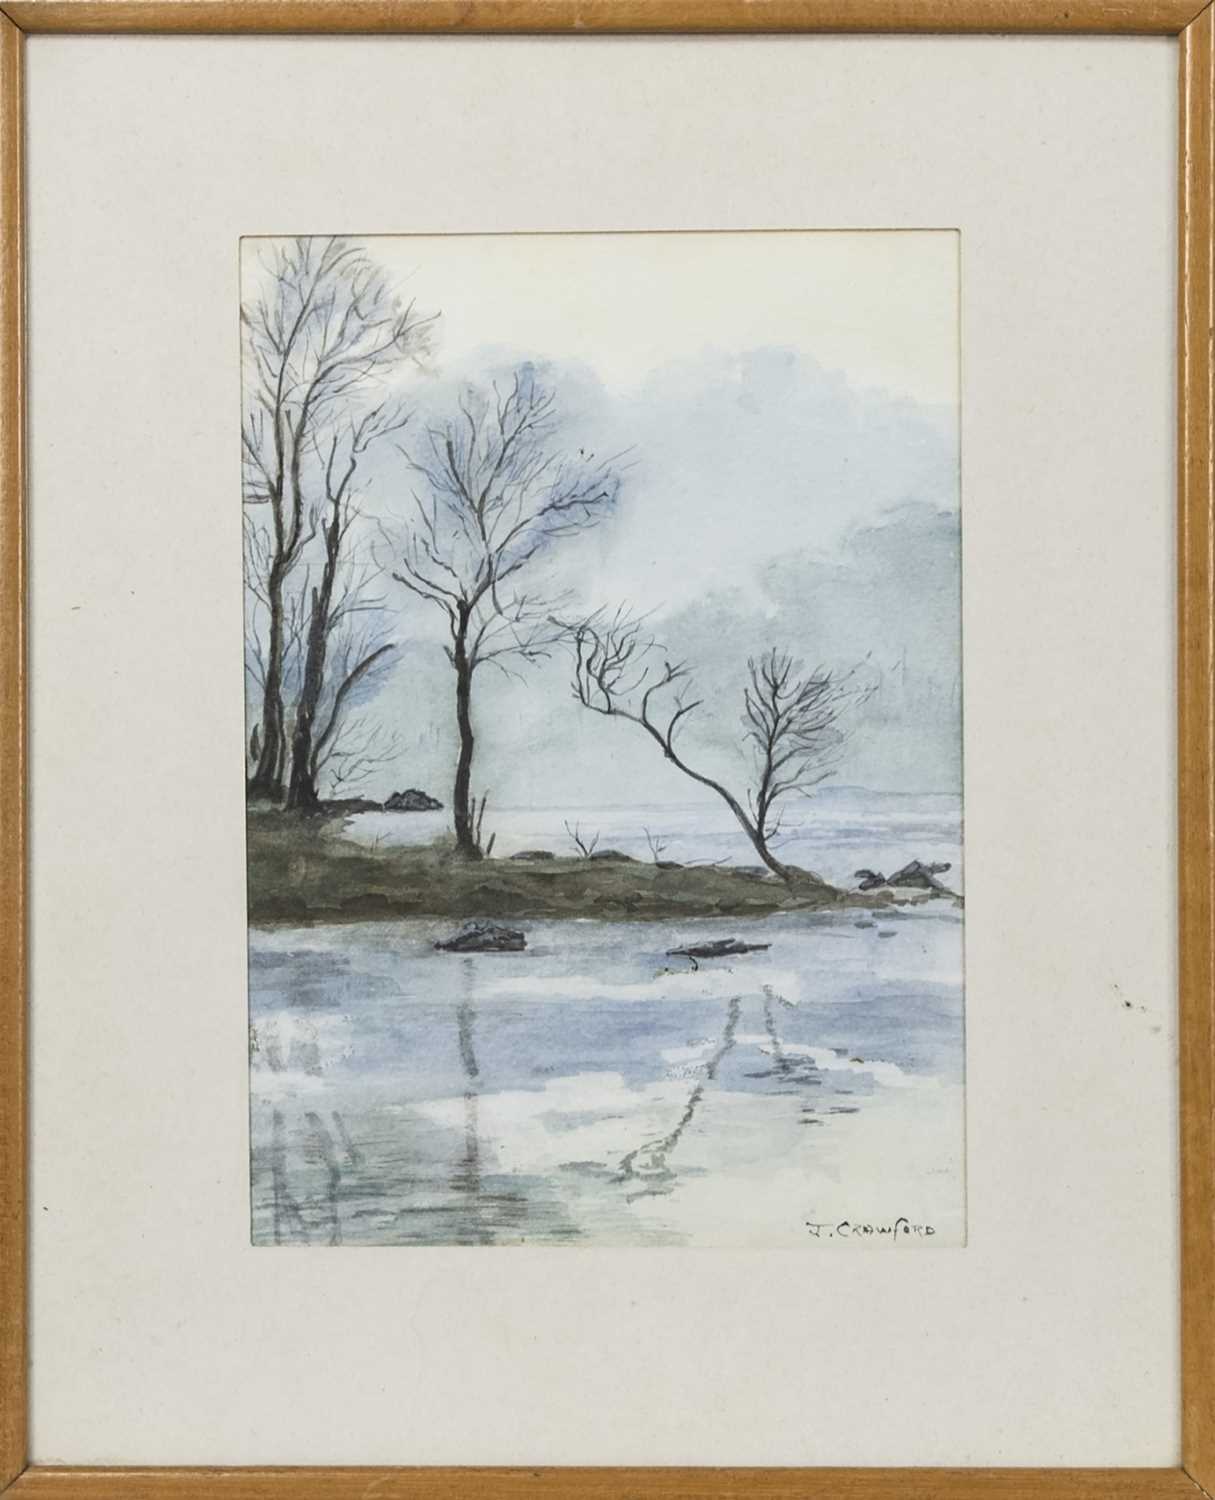 Lot 465 - MORNING ON LOCH LOMOND, A WATERCOLOUR BY J CRAWFORD